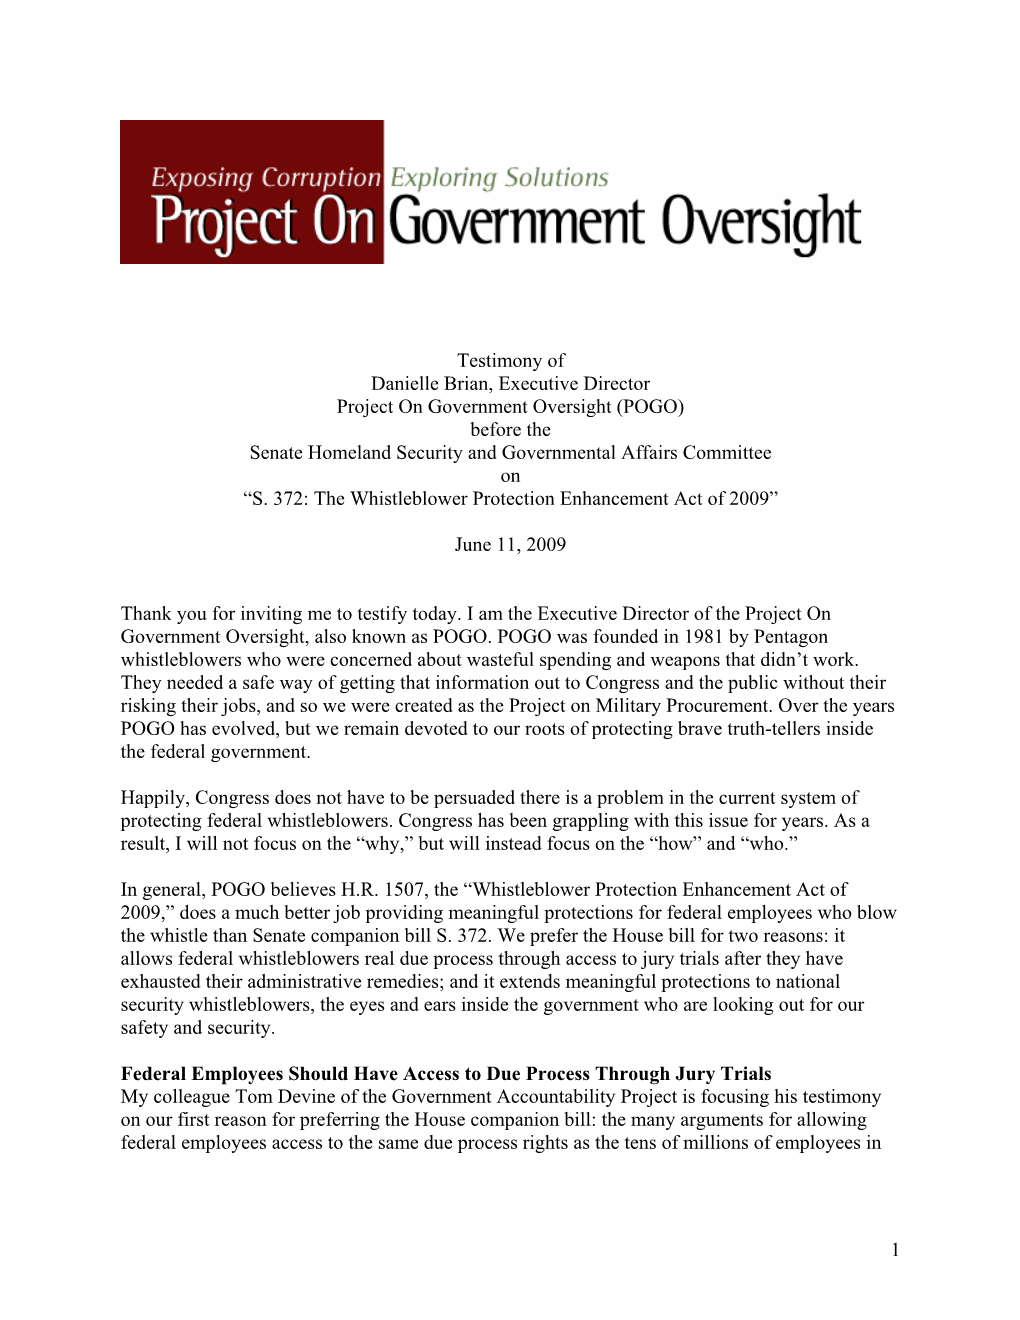 Testimony of Danielle Brian, Executive Director Project on Government Oversight (POGO) Before the Senate Homeland Security and Governmental Affairs Committee on “S